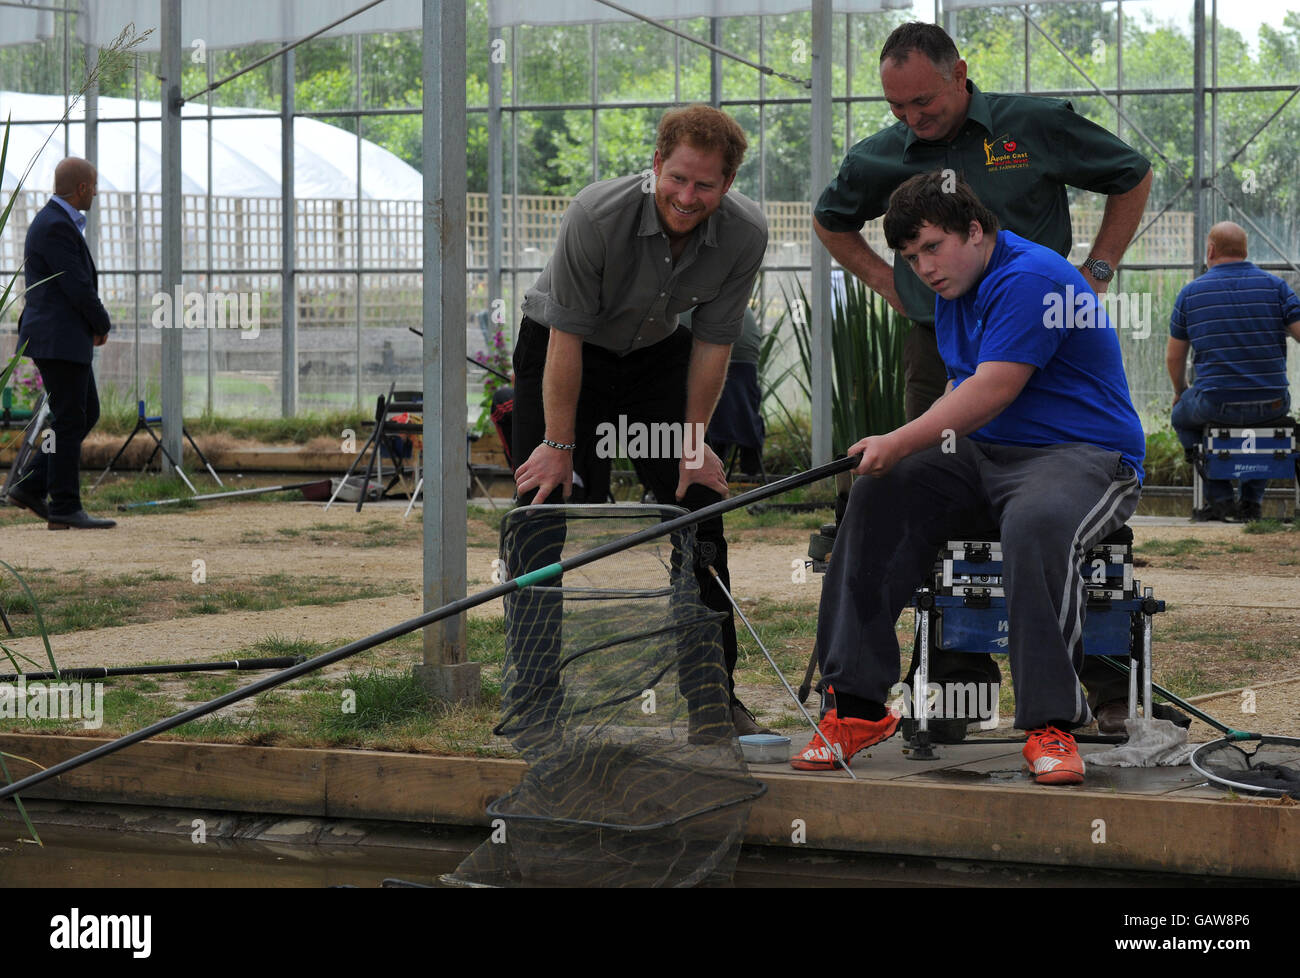 Prince Harry visits Cast North West, an angling venue in Wigan that helps enhance the employability and educational opportunities of disadvantaged young people, as he continues to promote sport as a means for social development. Stock Photo